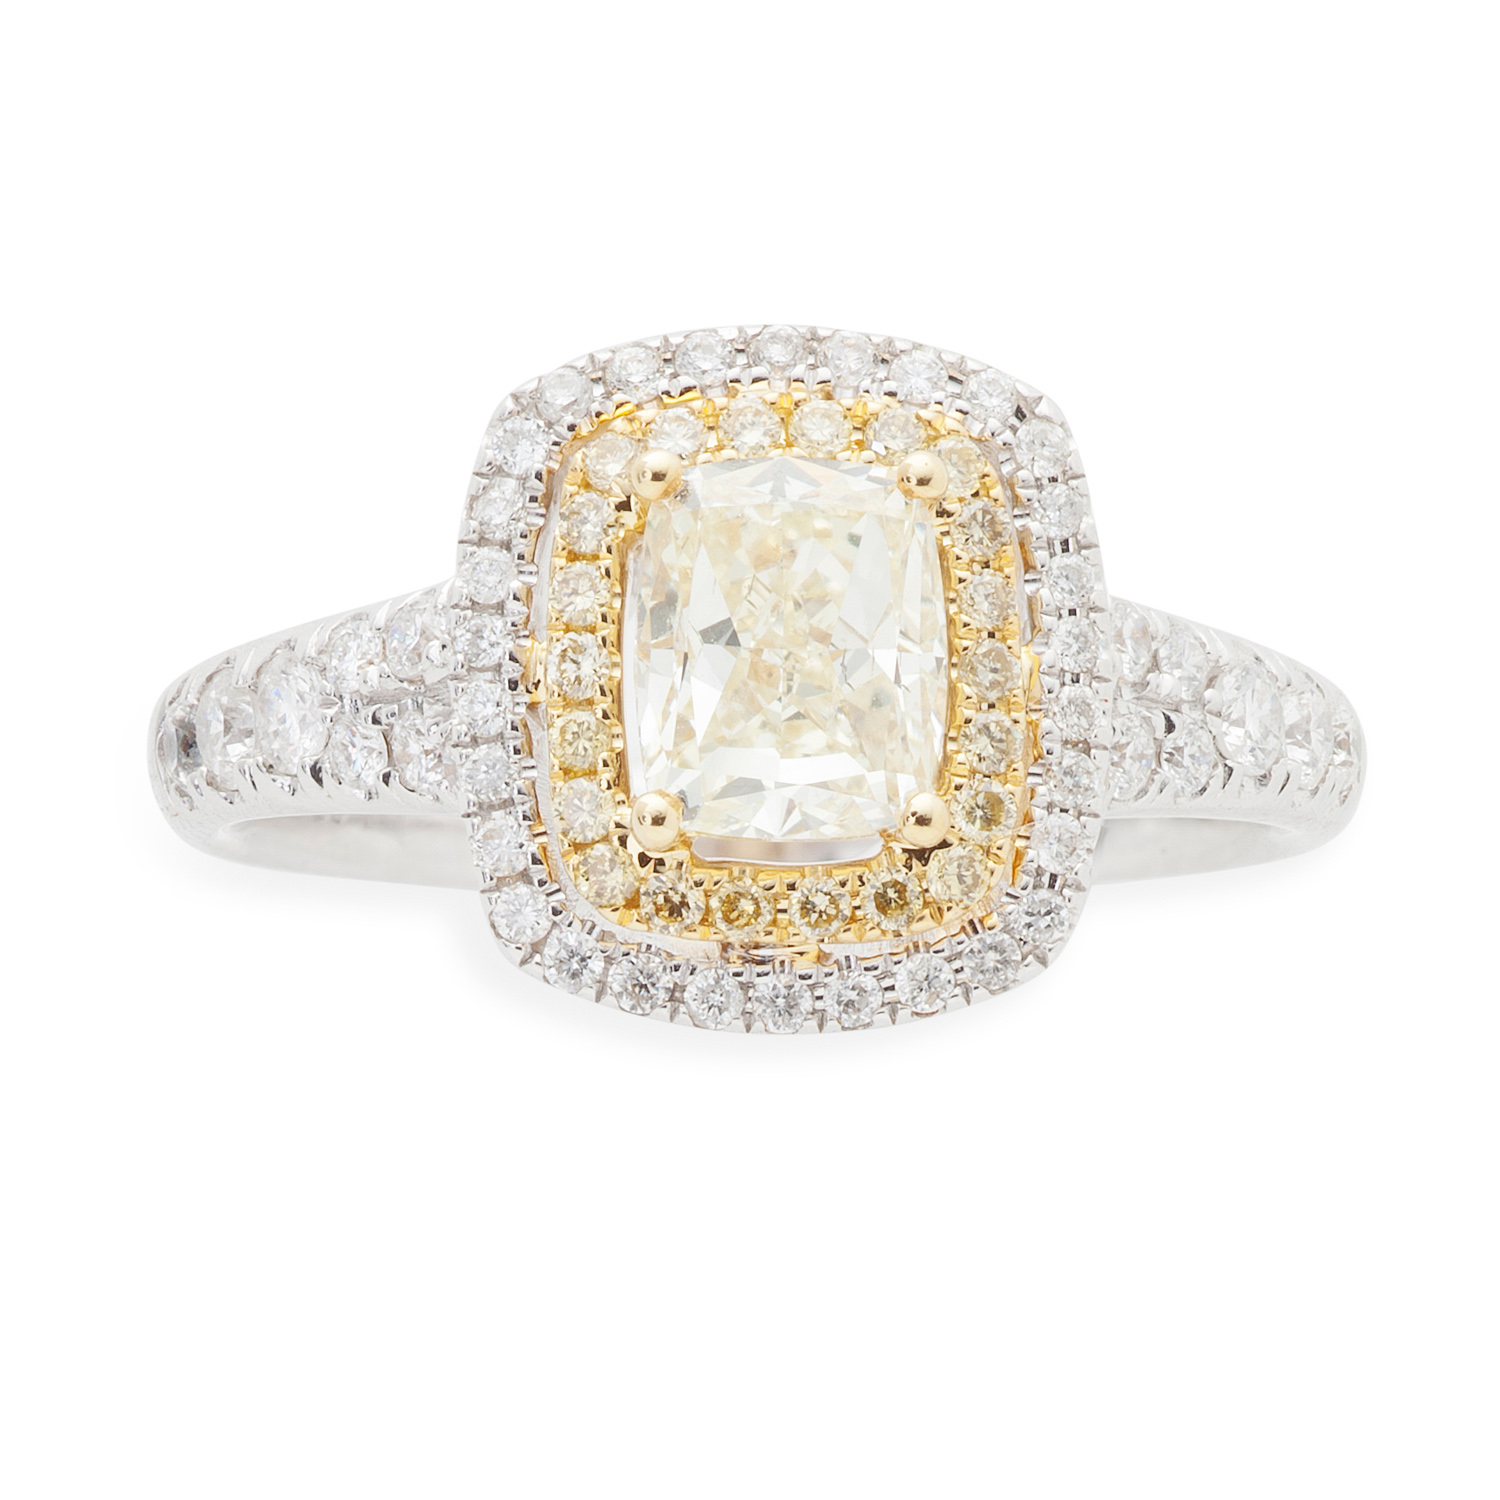 Lot 190 - A fancy light yellow and colourless diamond set ring